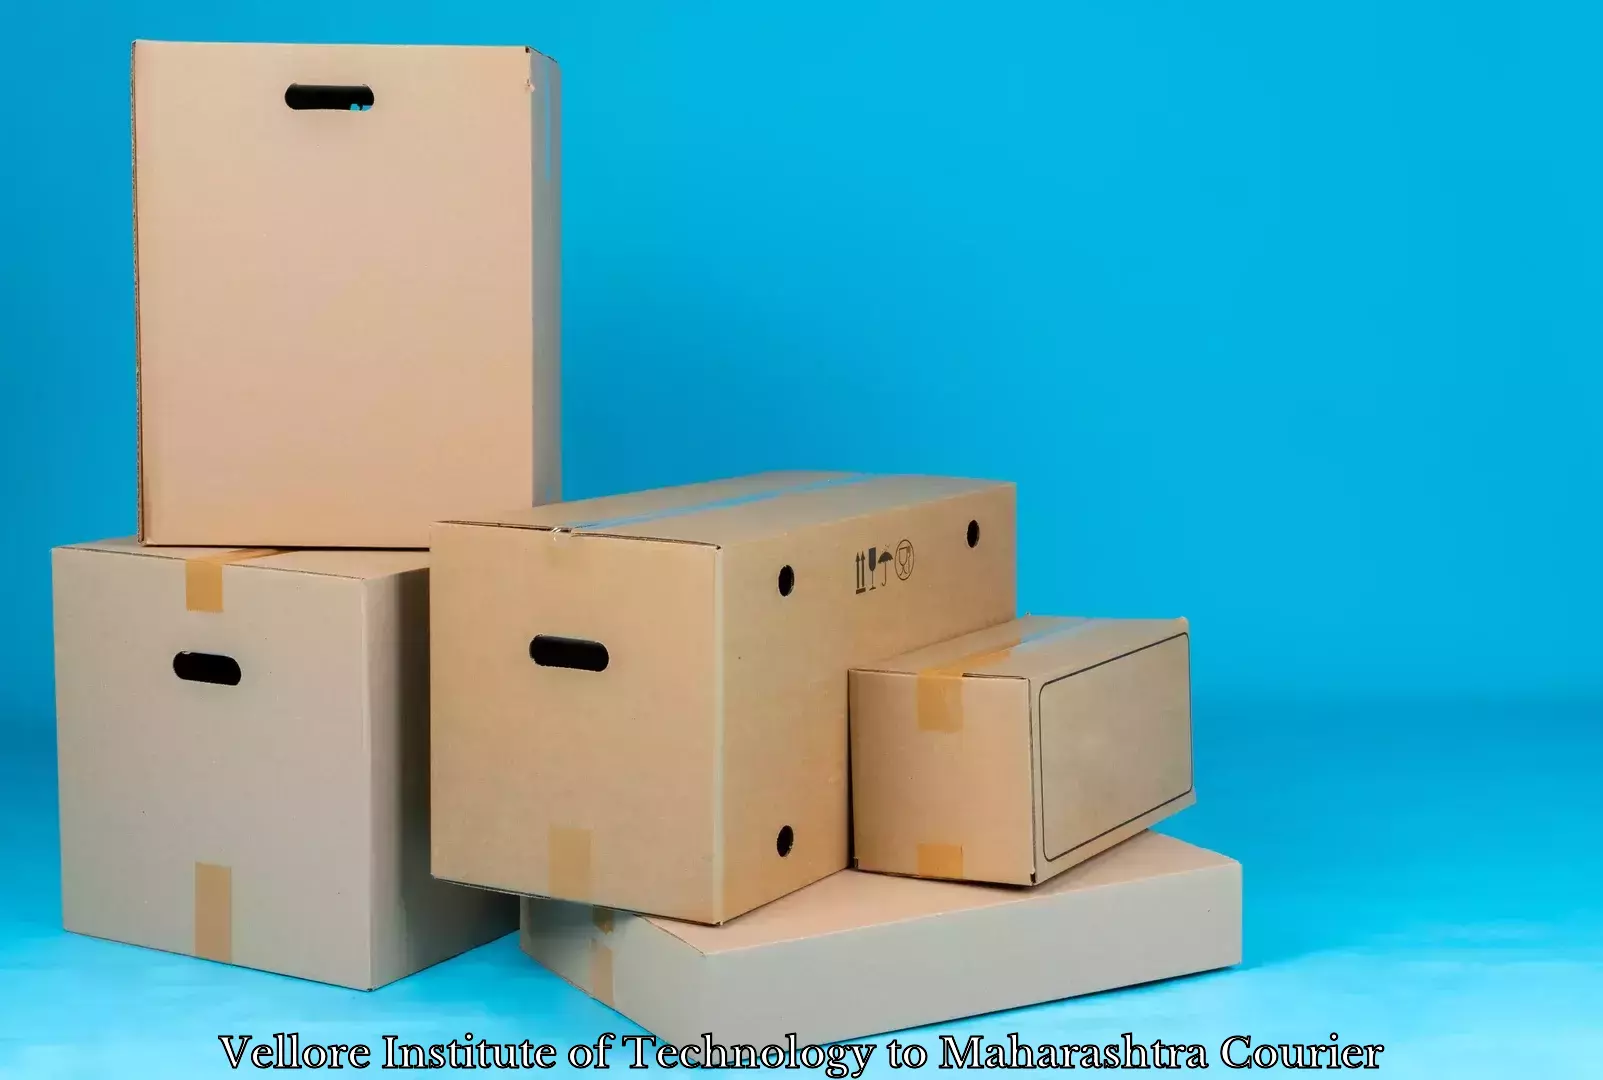 Home relocation services Vellore Institute of Technology to Mangrulpir